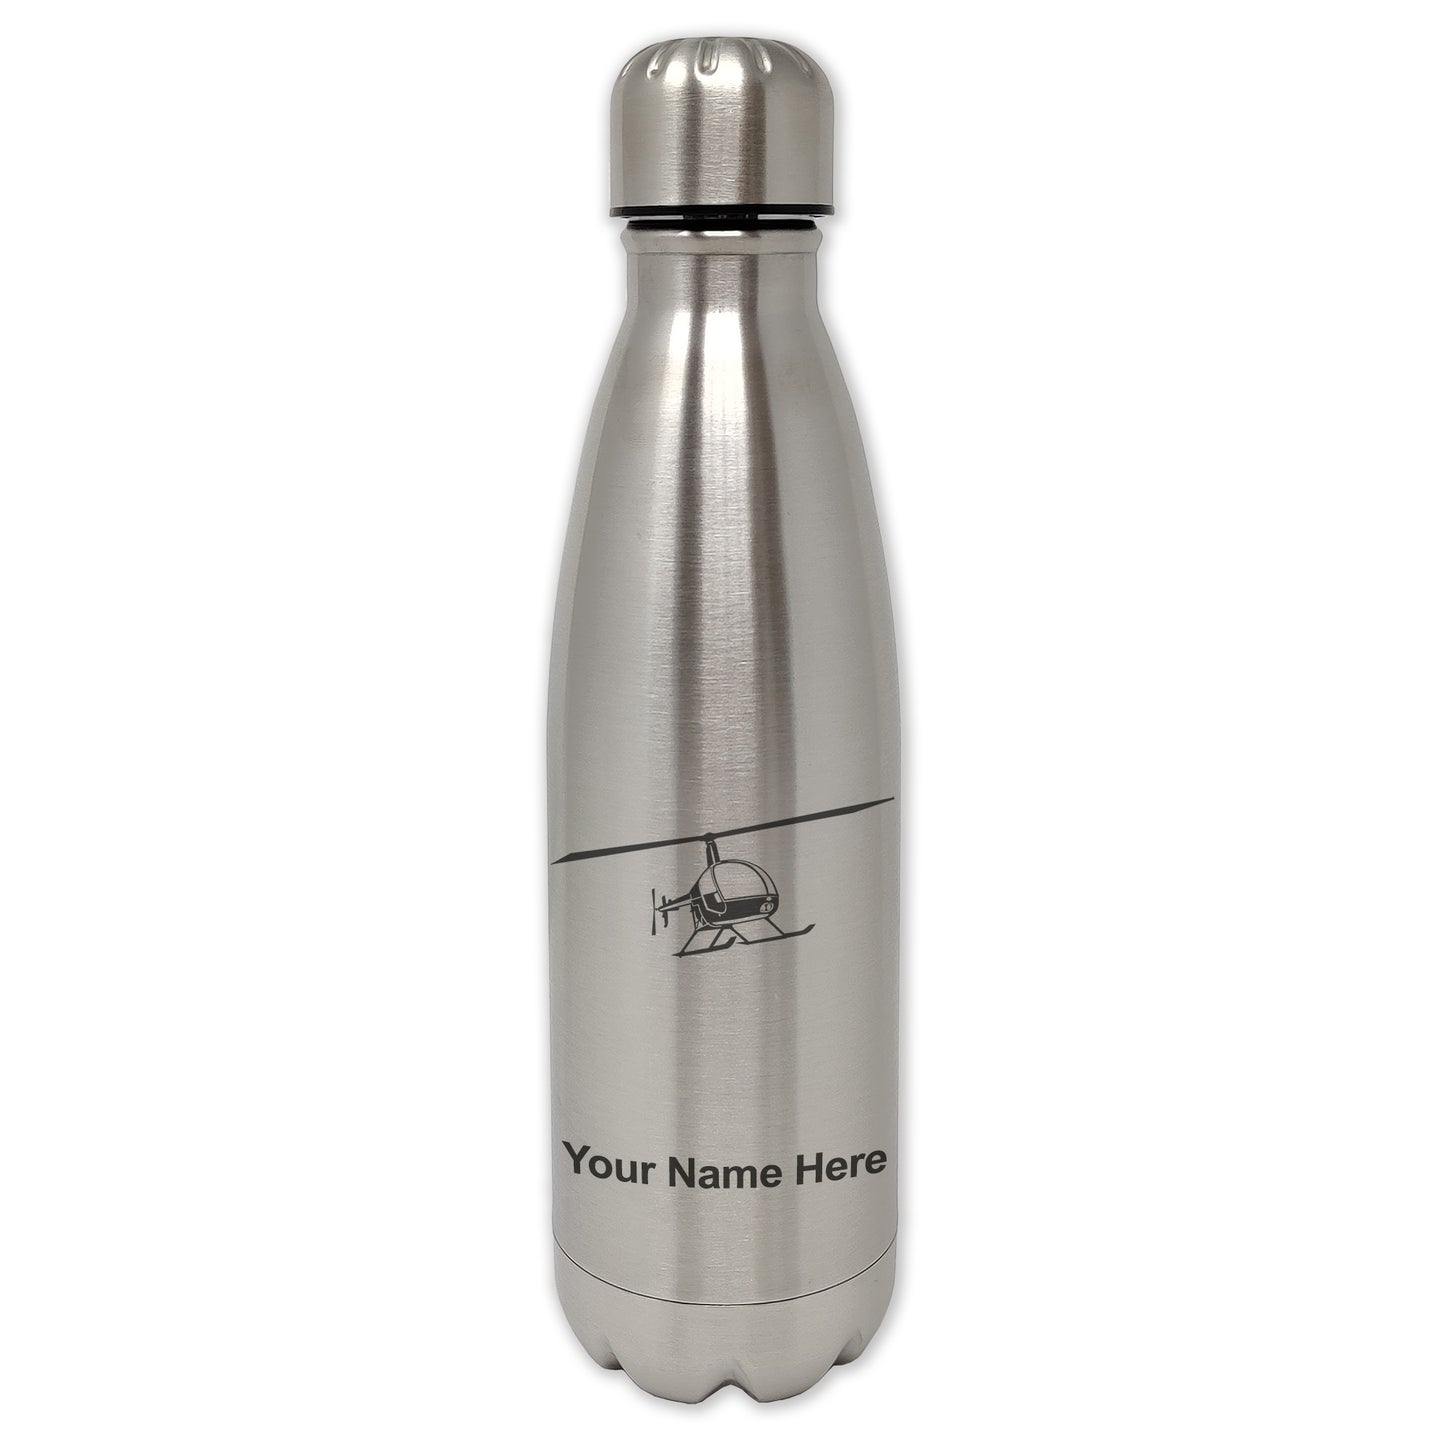 LaserGram Double Wall Water Bottle, Helicopter 2, Personalized Engraving Included